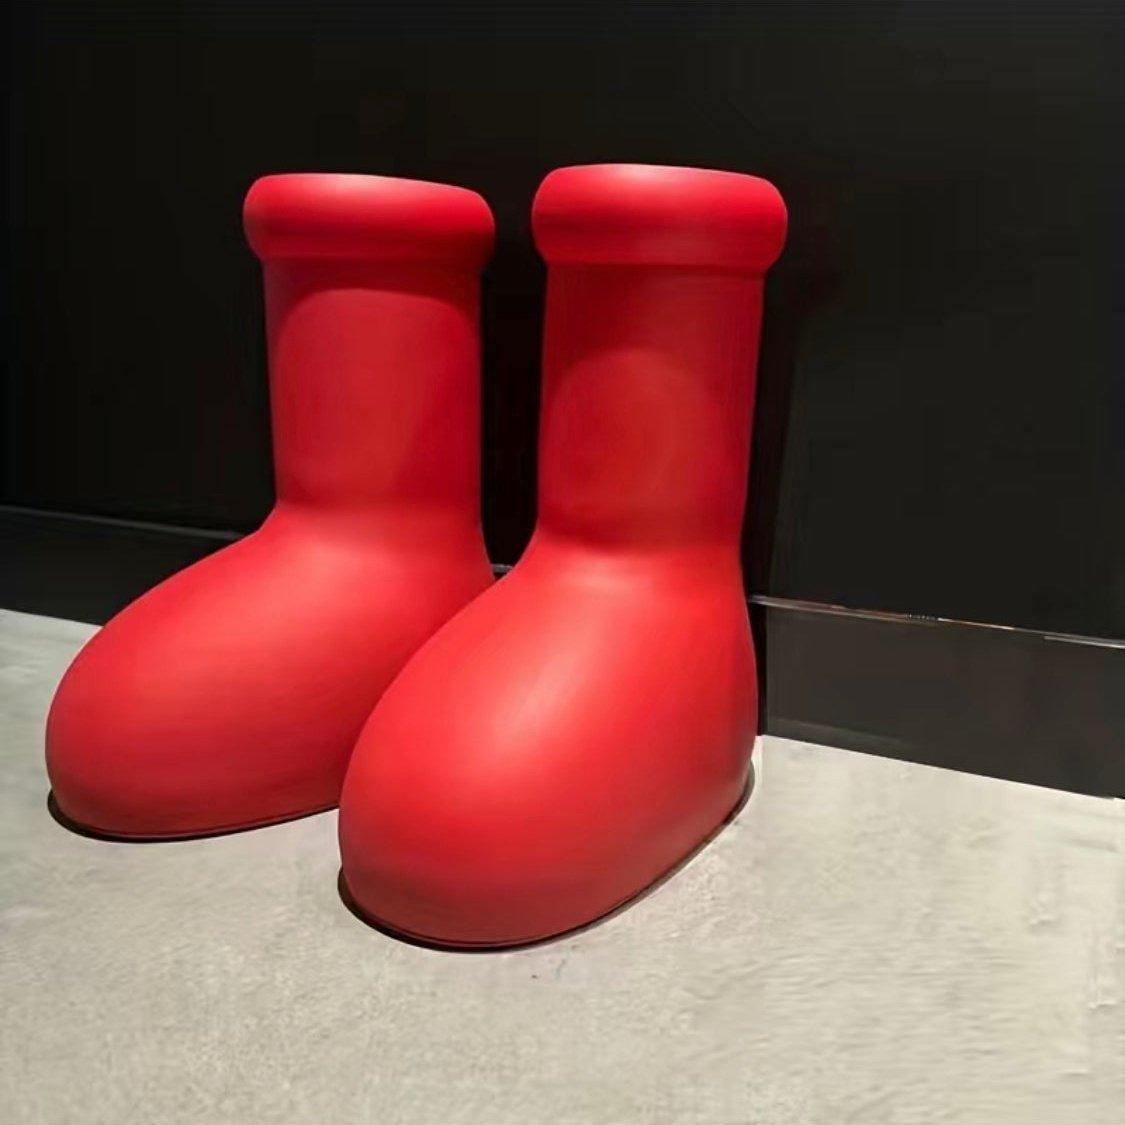 The Viral Big Red Boots